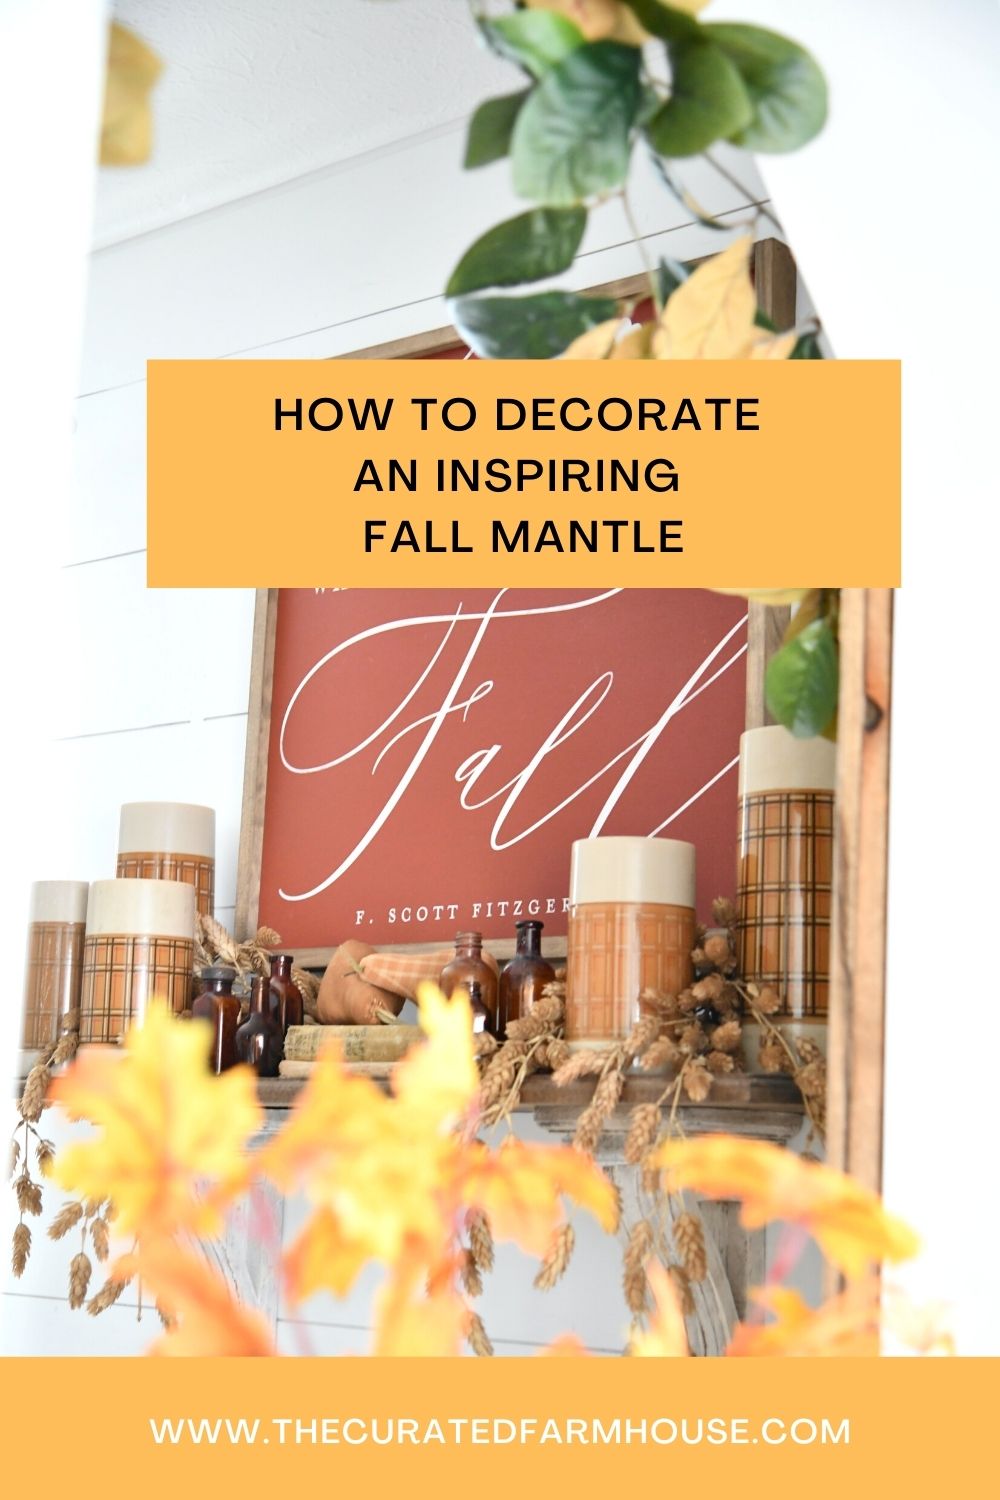 How To Decorate an Inspiring Fall Mantle